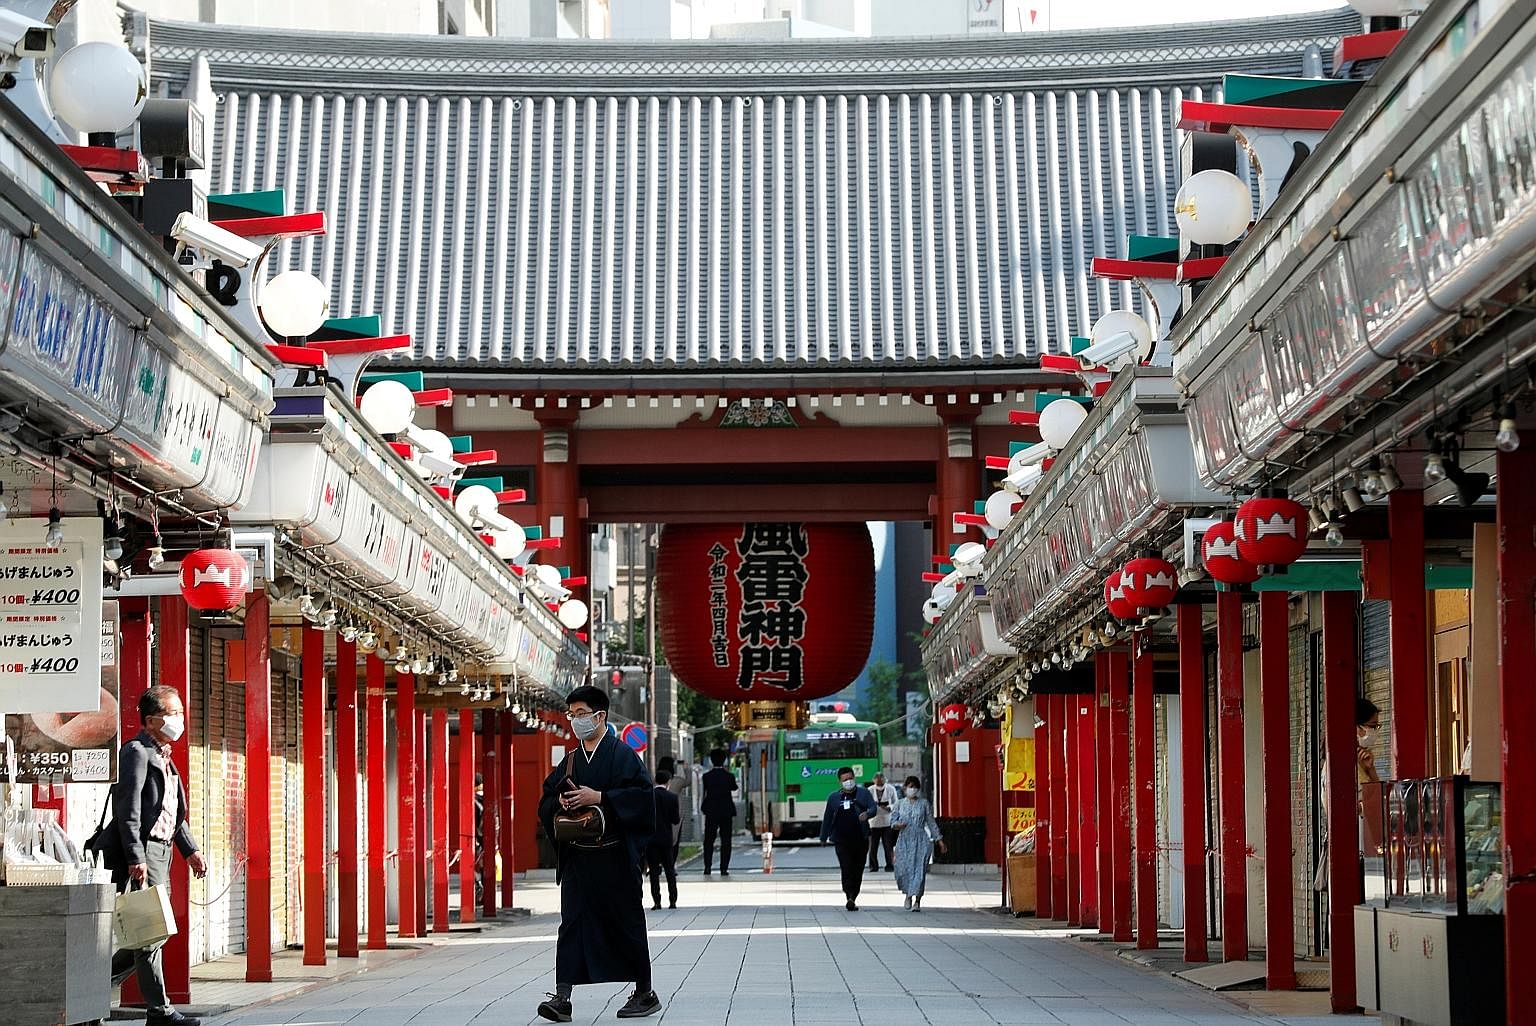 People at a temple in Japan amid the coronavirus pandemic. As life regains some semblance of its old self, the writer wonders if it is possible to return to activity without losing the perspective gained in stillness.